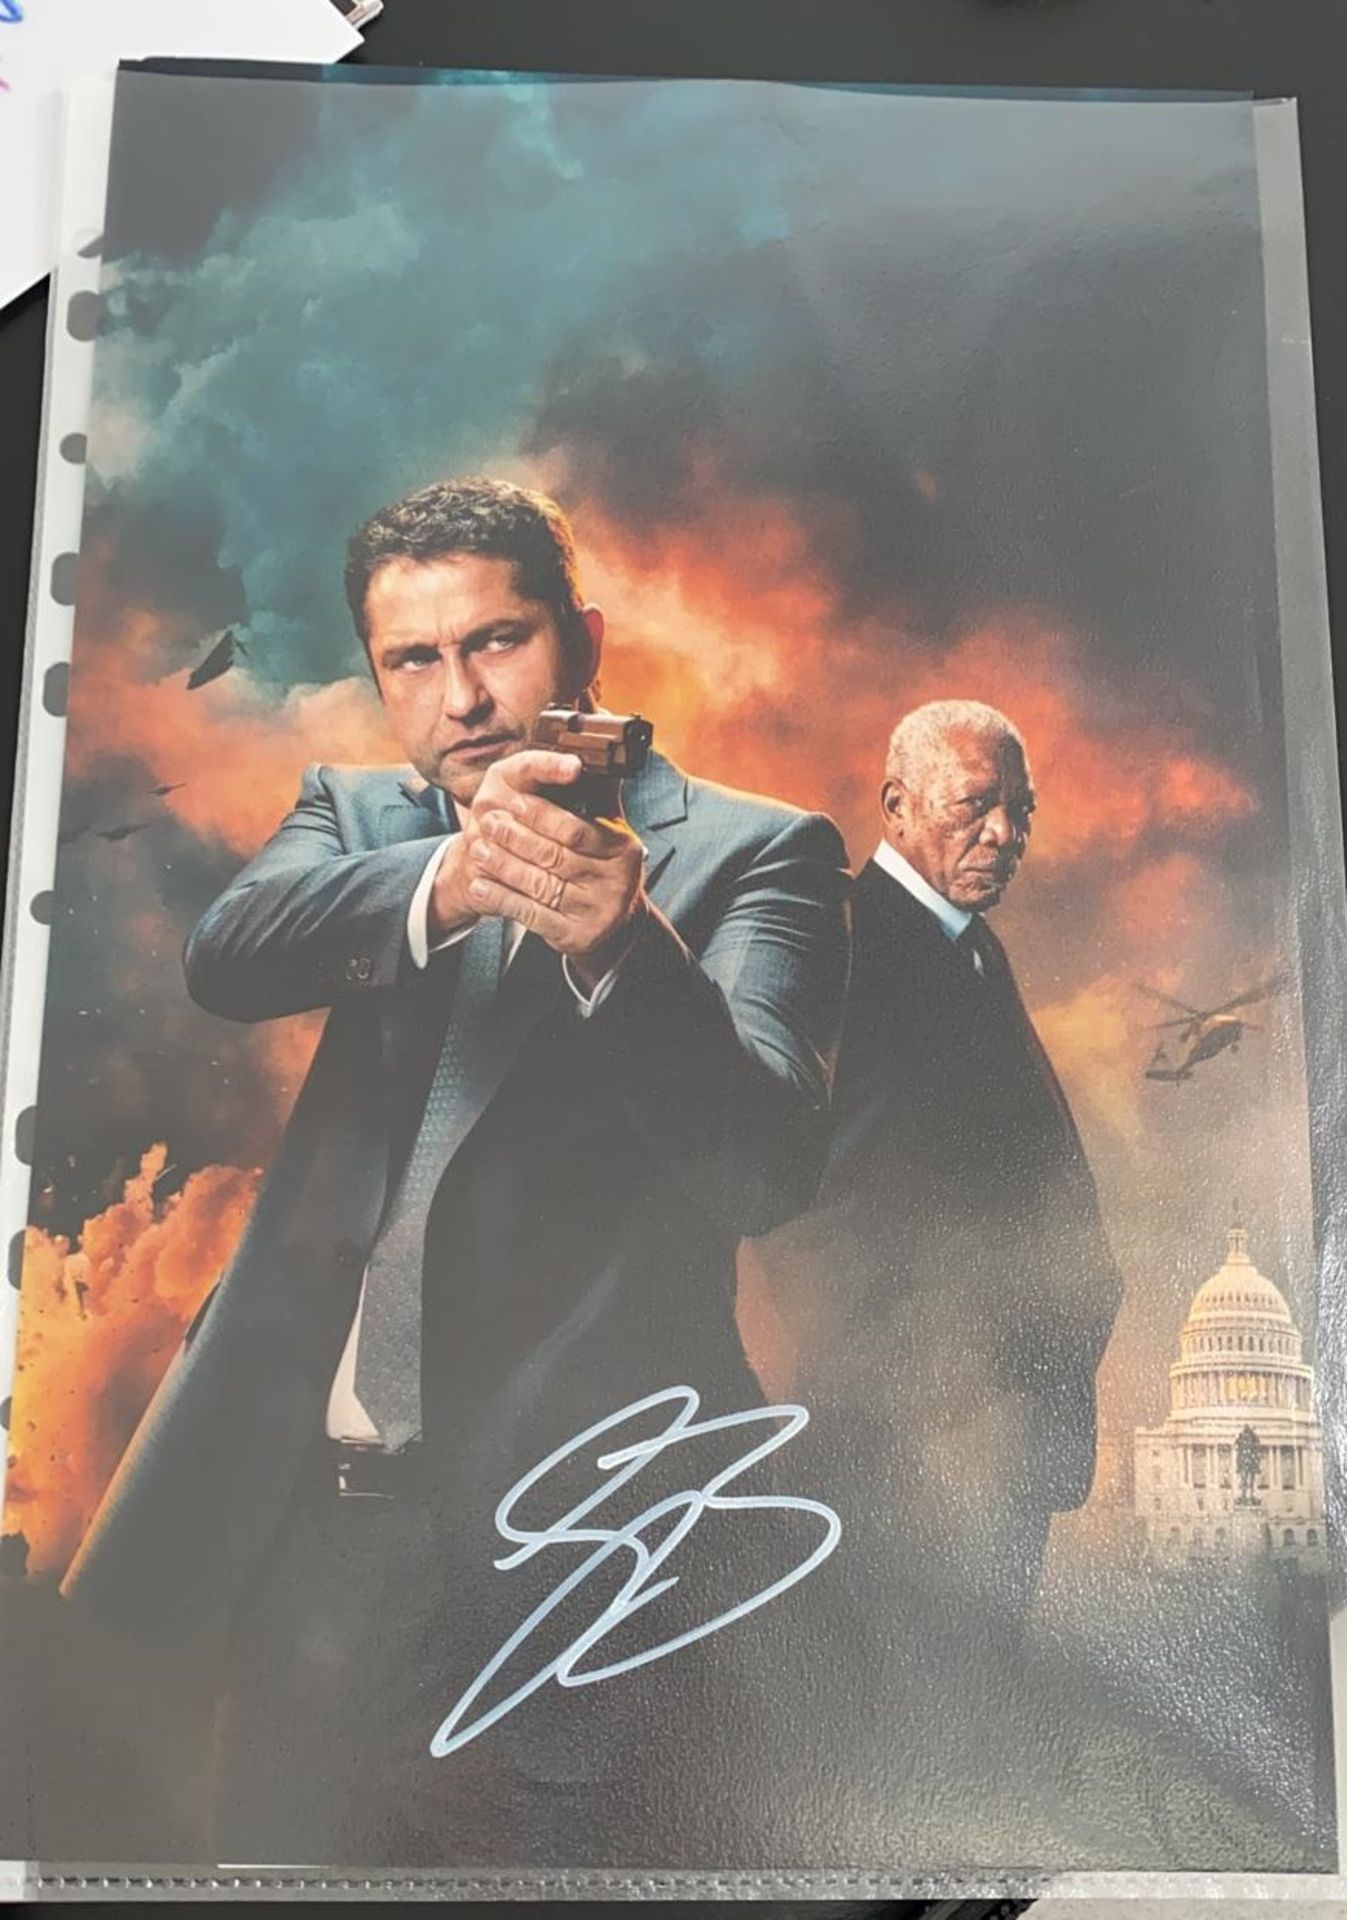 1 x Signed Autograph Picture - GERARD BUTLER ANGEL HAS FALLEN - With COA - Size 12 x 8 Inch - - Image 2 of 3